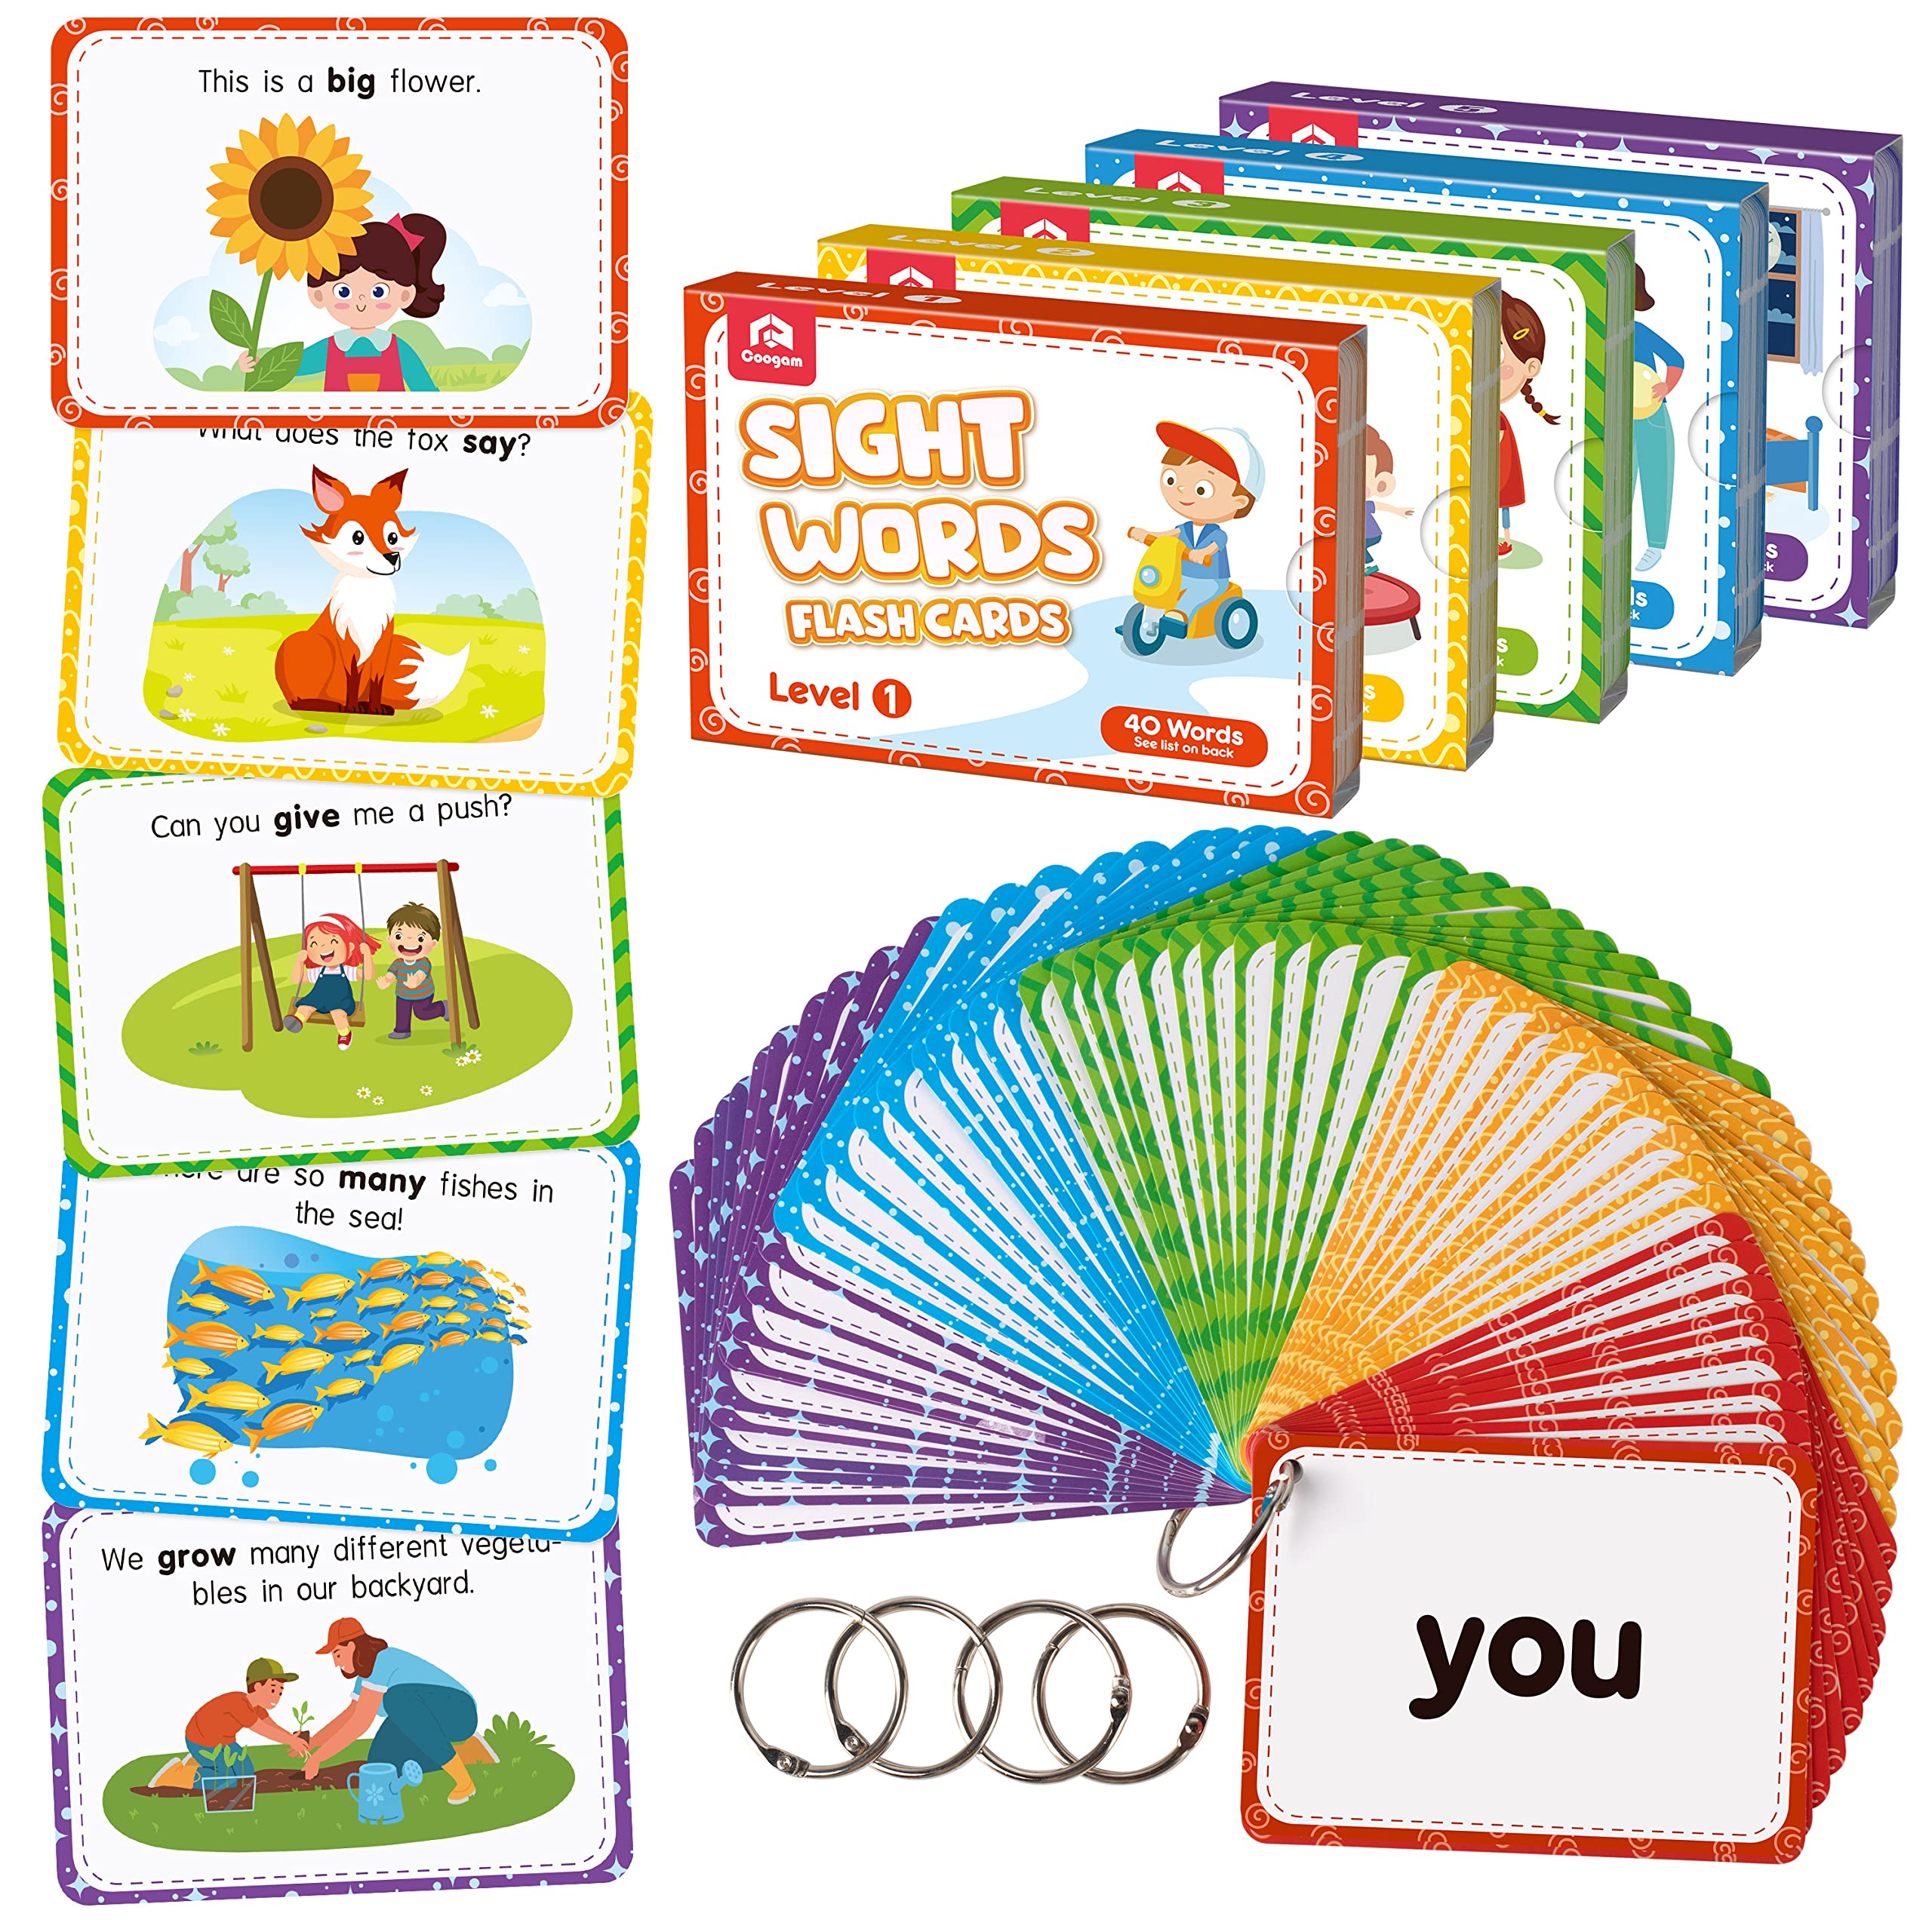 C COOGAM coogam Sight Words Flashcards - 220 Dolch Sightwords game with Pictures & Sentences,Literacy Learning Reading cards Toy for Kind